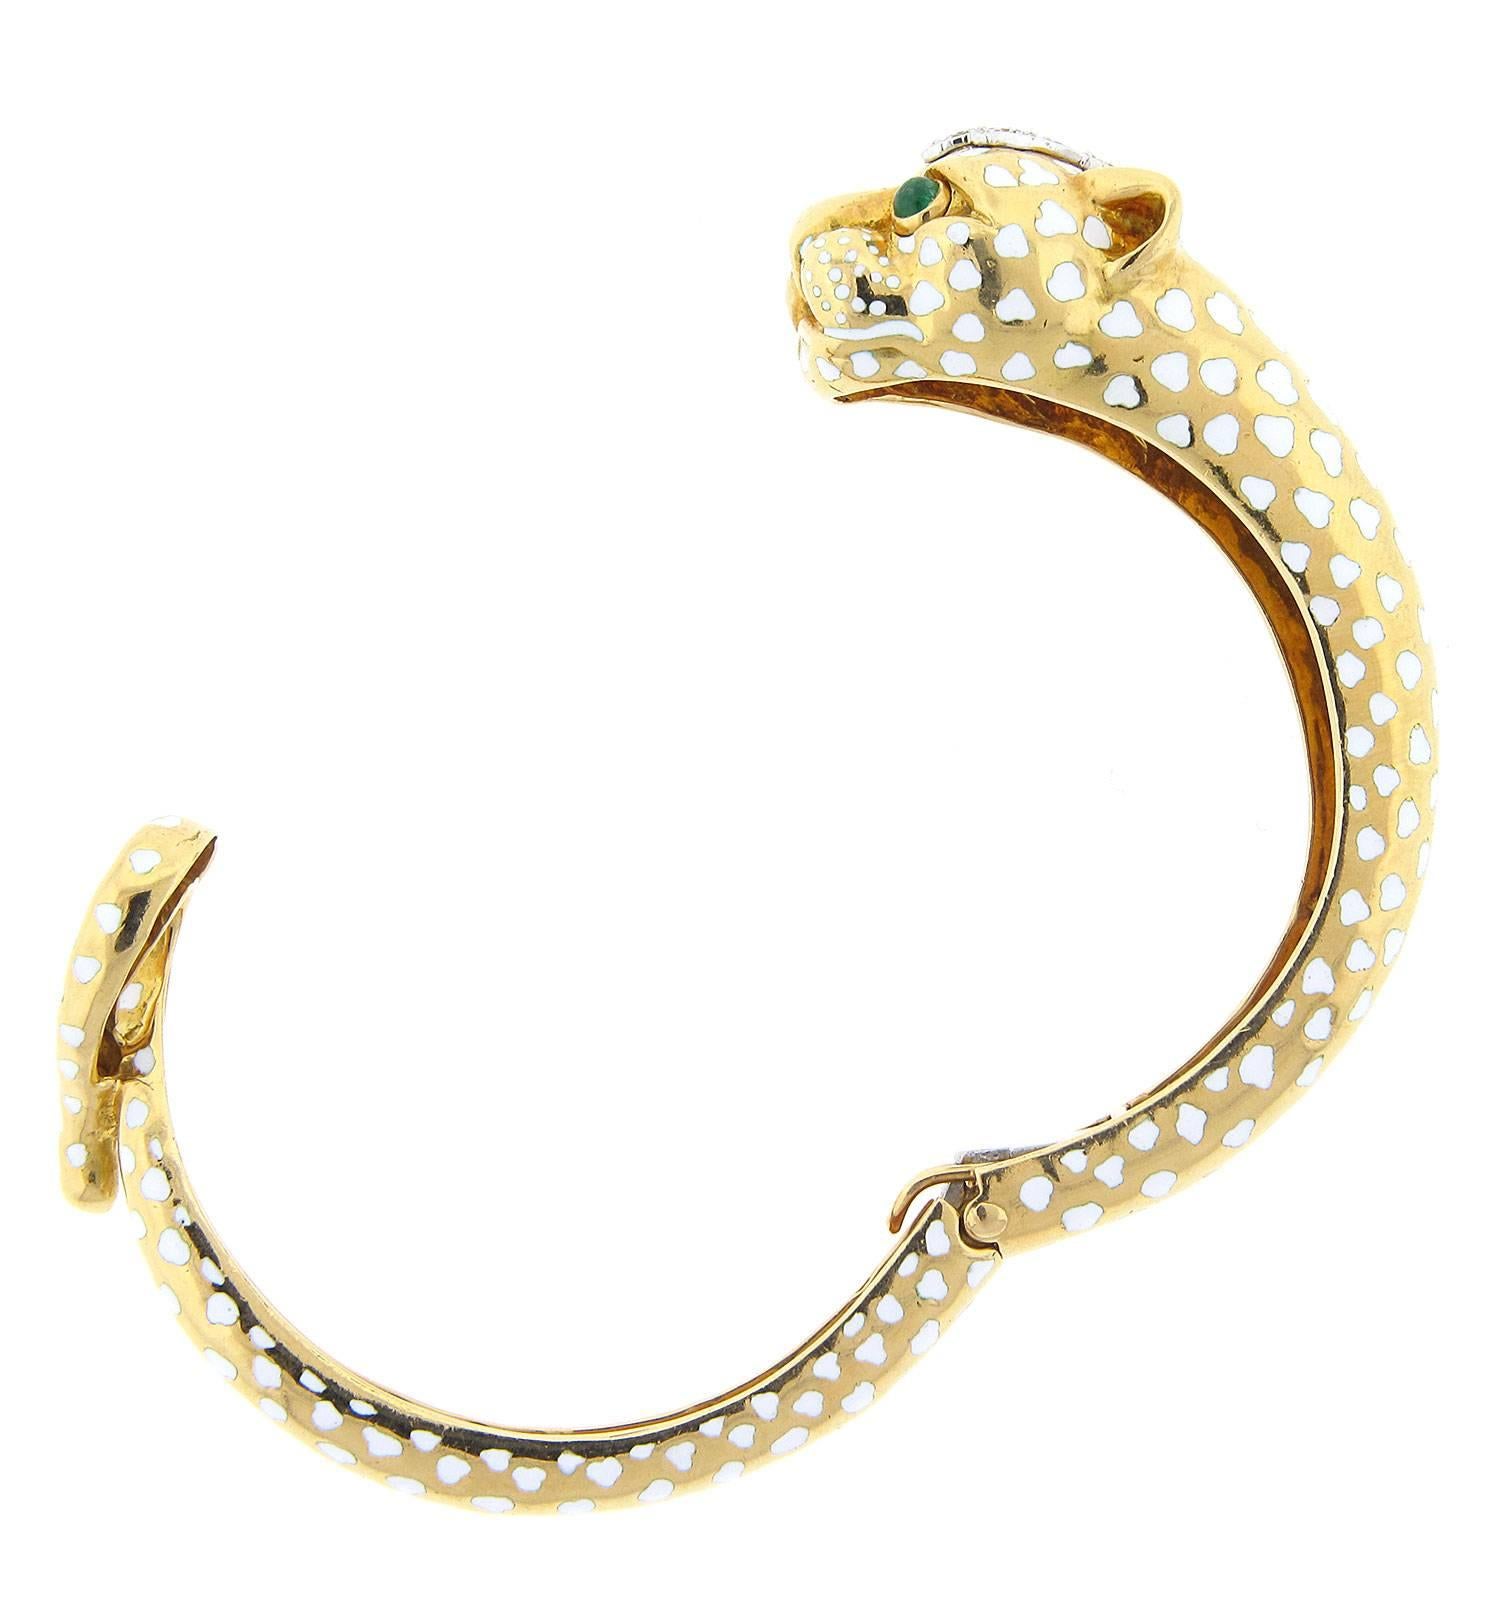  David Webb Panther Bangle 18 Karat Yellow Gold In Excellent Condition For Sale In Chicago, IL